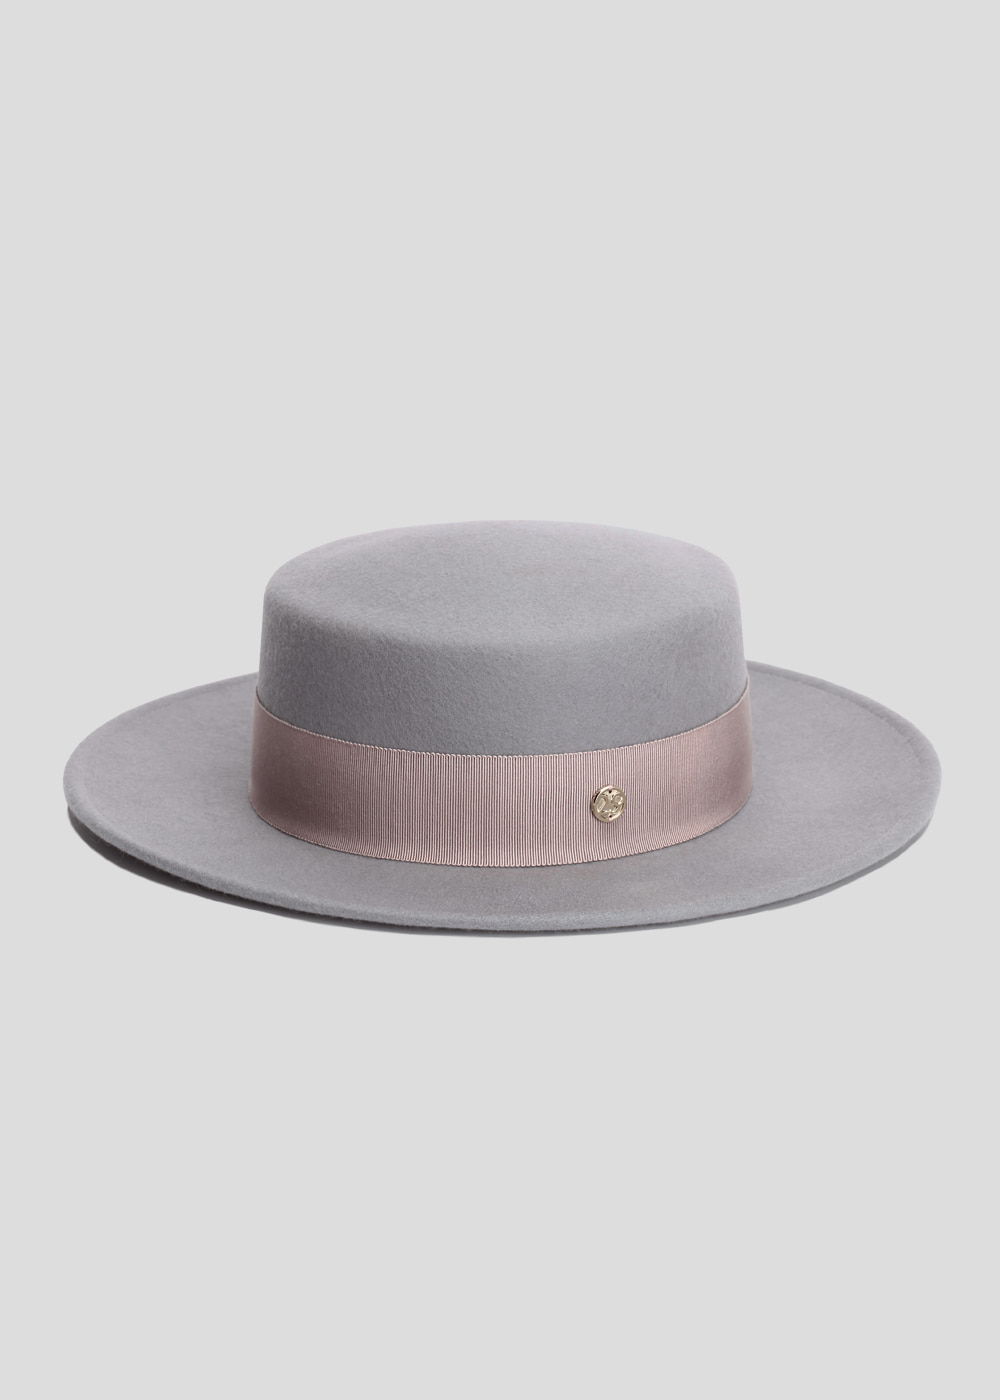 classic boater gray/ blush pink